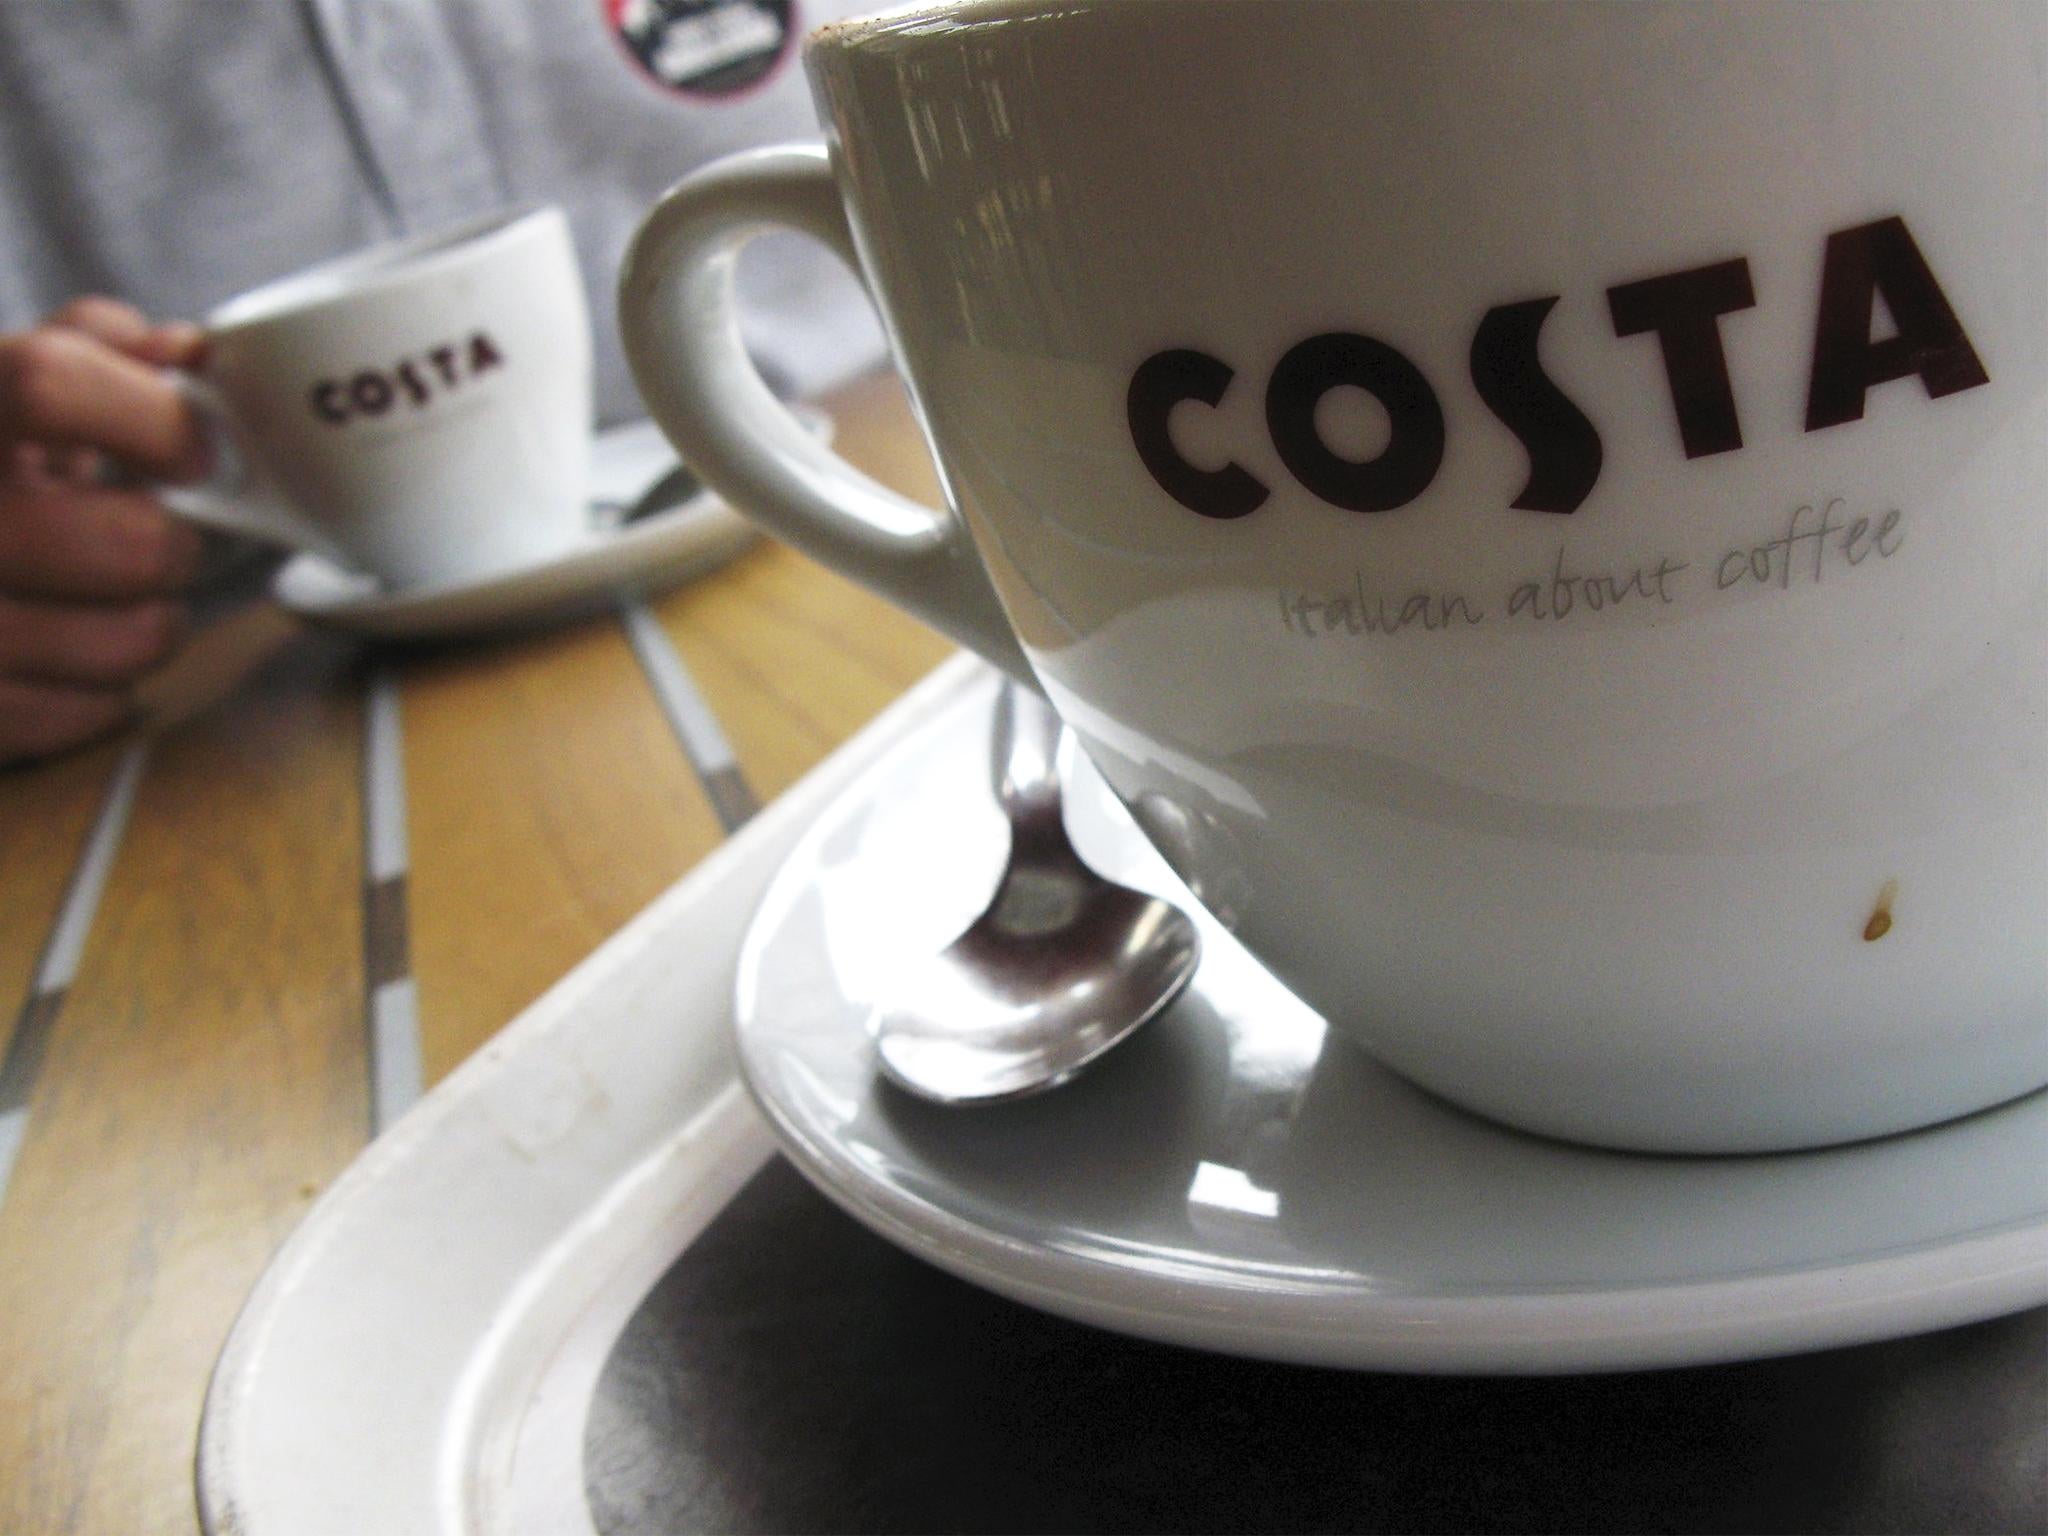 Costa Coffee has over 1,700 outlets across the UK